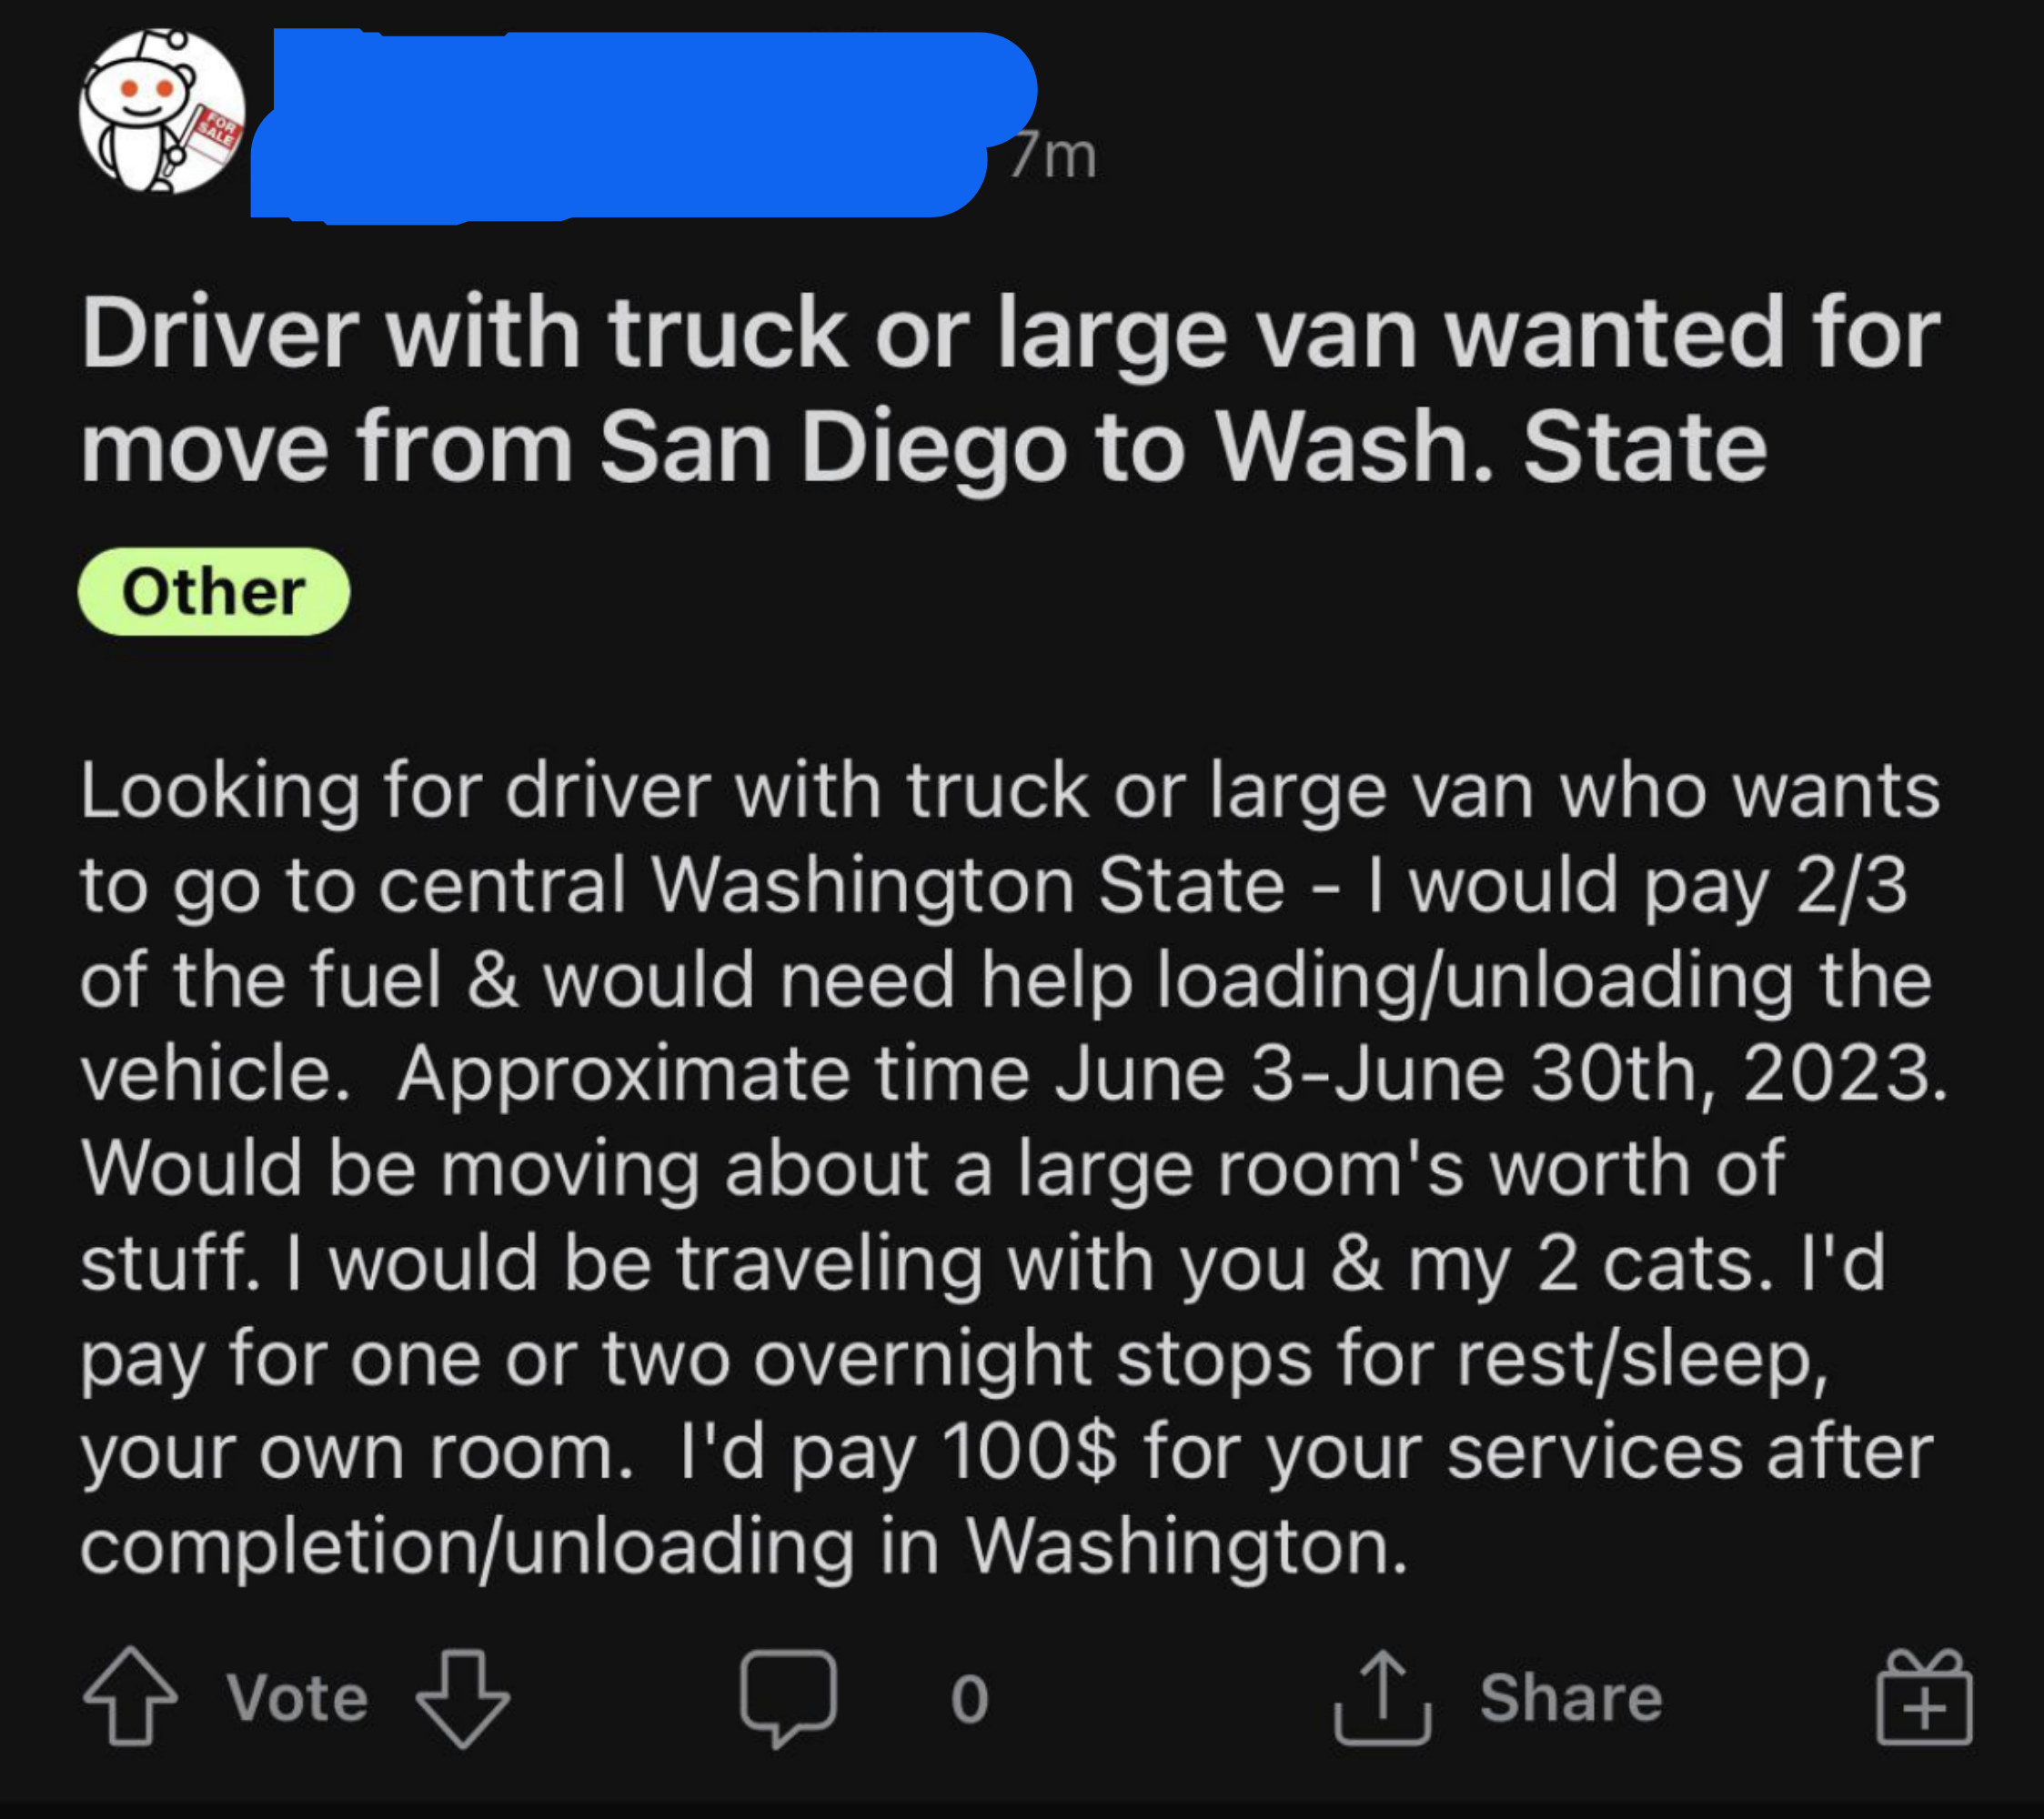 &quot;I&#x27;d pay 100$ for your services after completion/unloading in Washington.&quot;